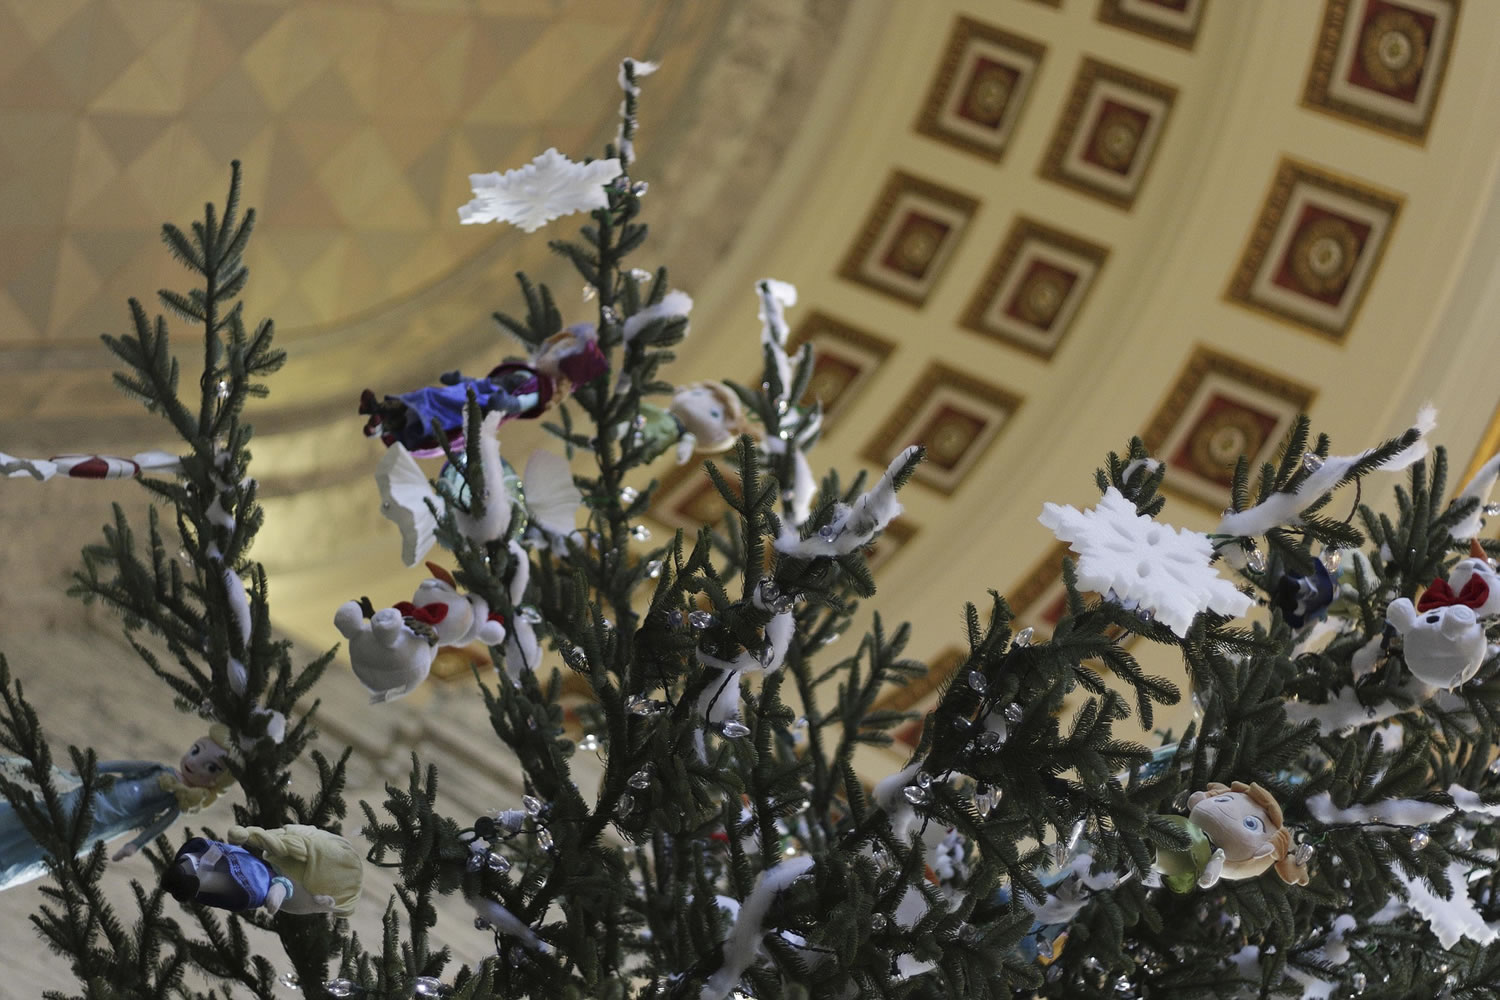 Decorations adorn the state holiday tree in the Capitol Rotunda in Olympia on Monday. The 35-foot noble fir is from a tree farm in Olympia.